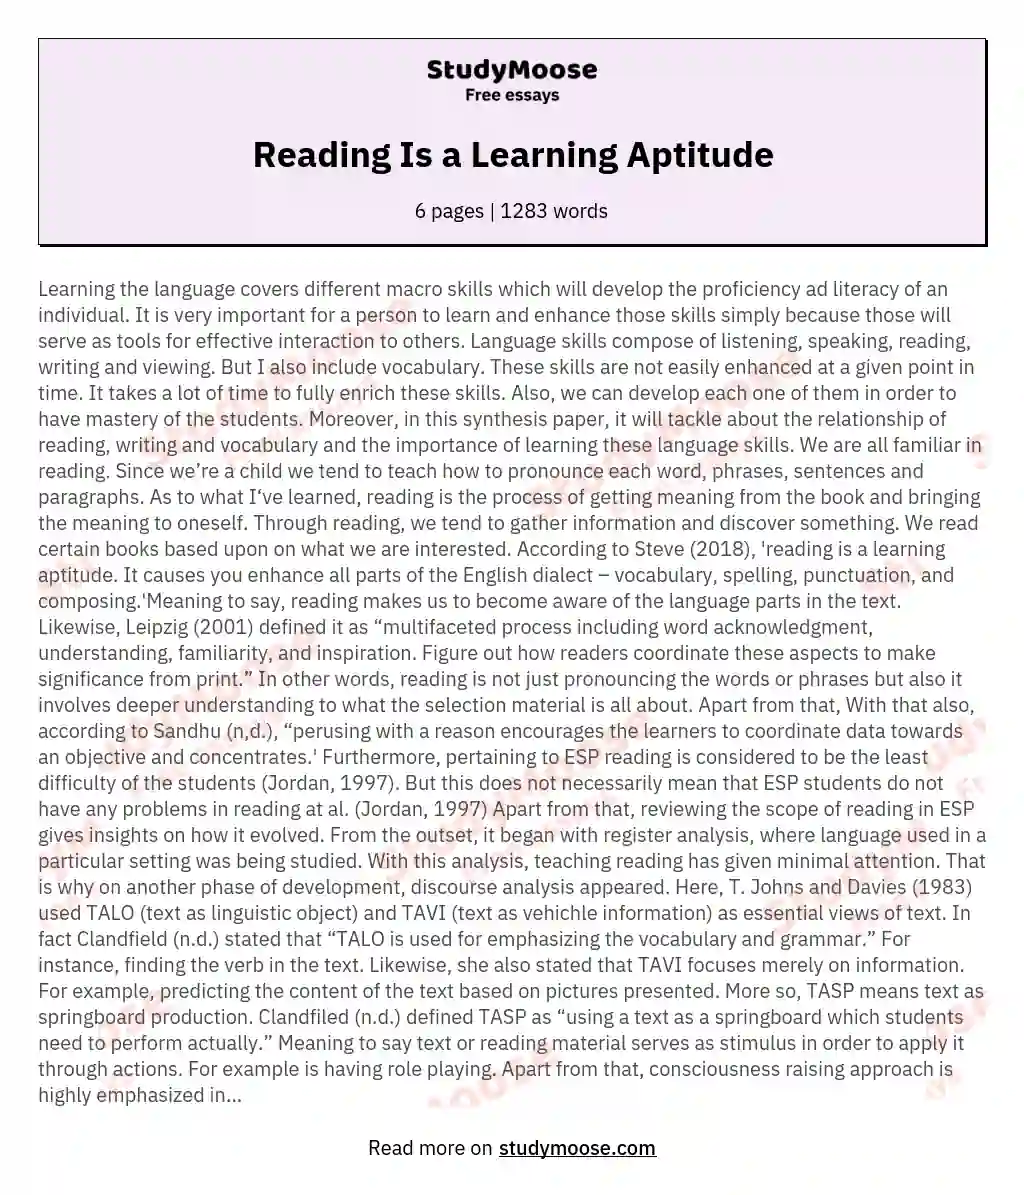 Reading Is a Learning Aptitude essay